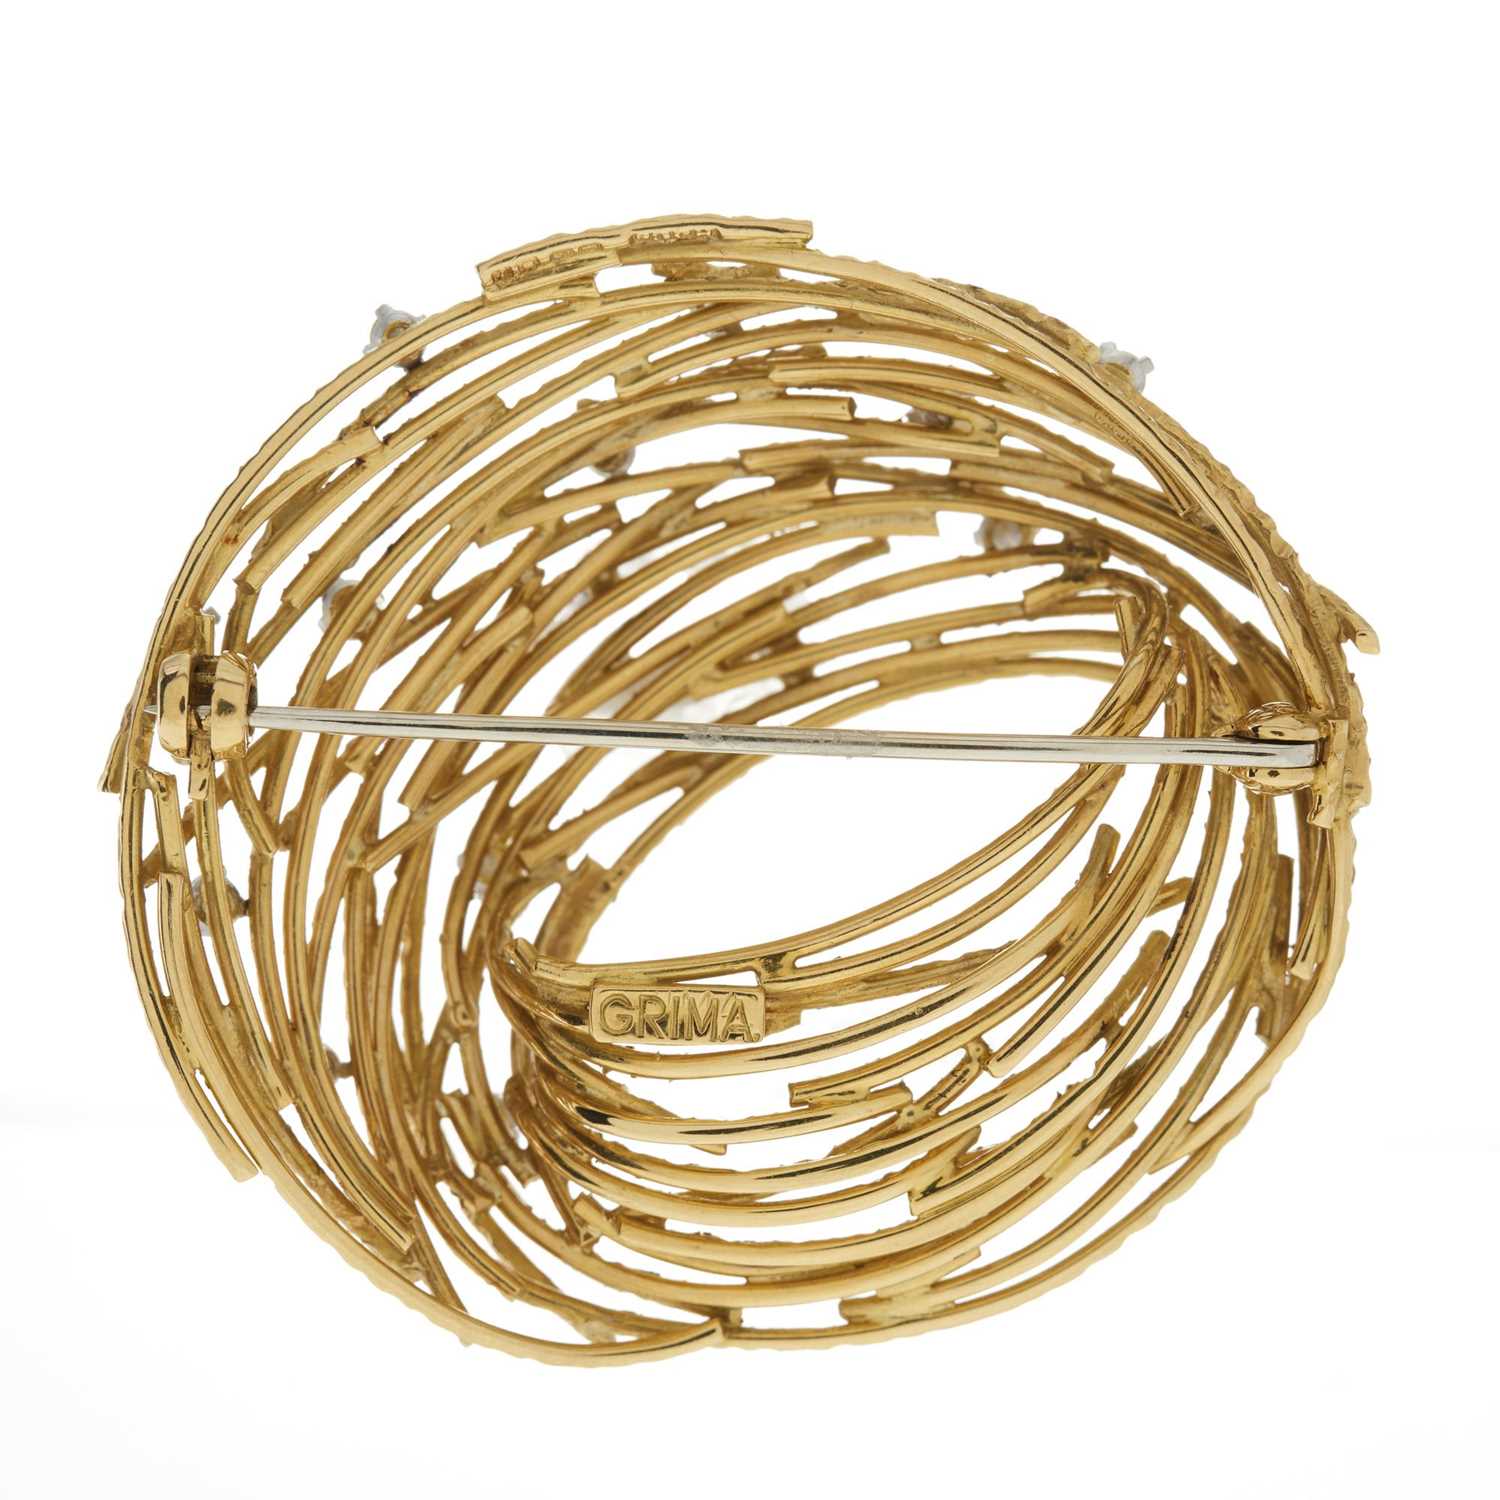 Andrew Grima, a 1960s 18ct gold diamond brooch - Image 2 of 2